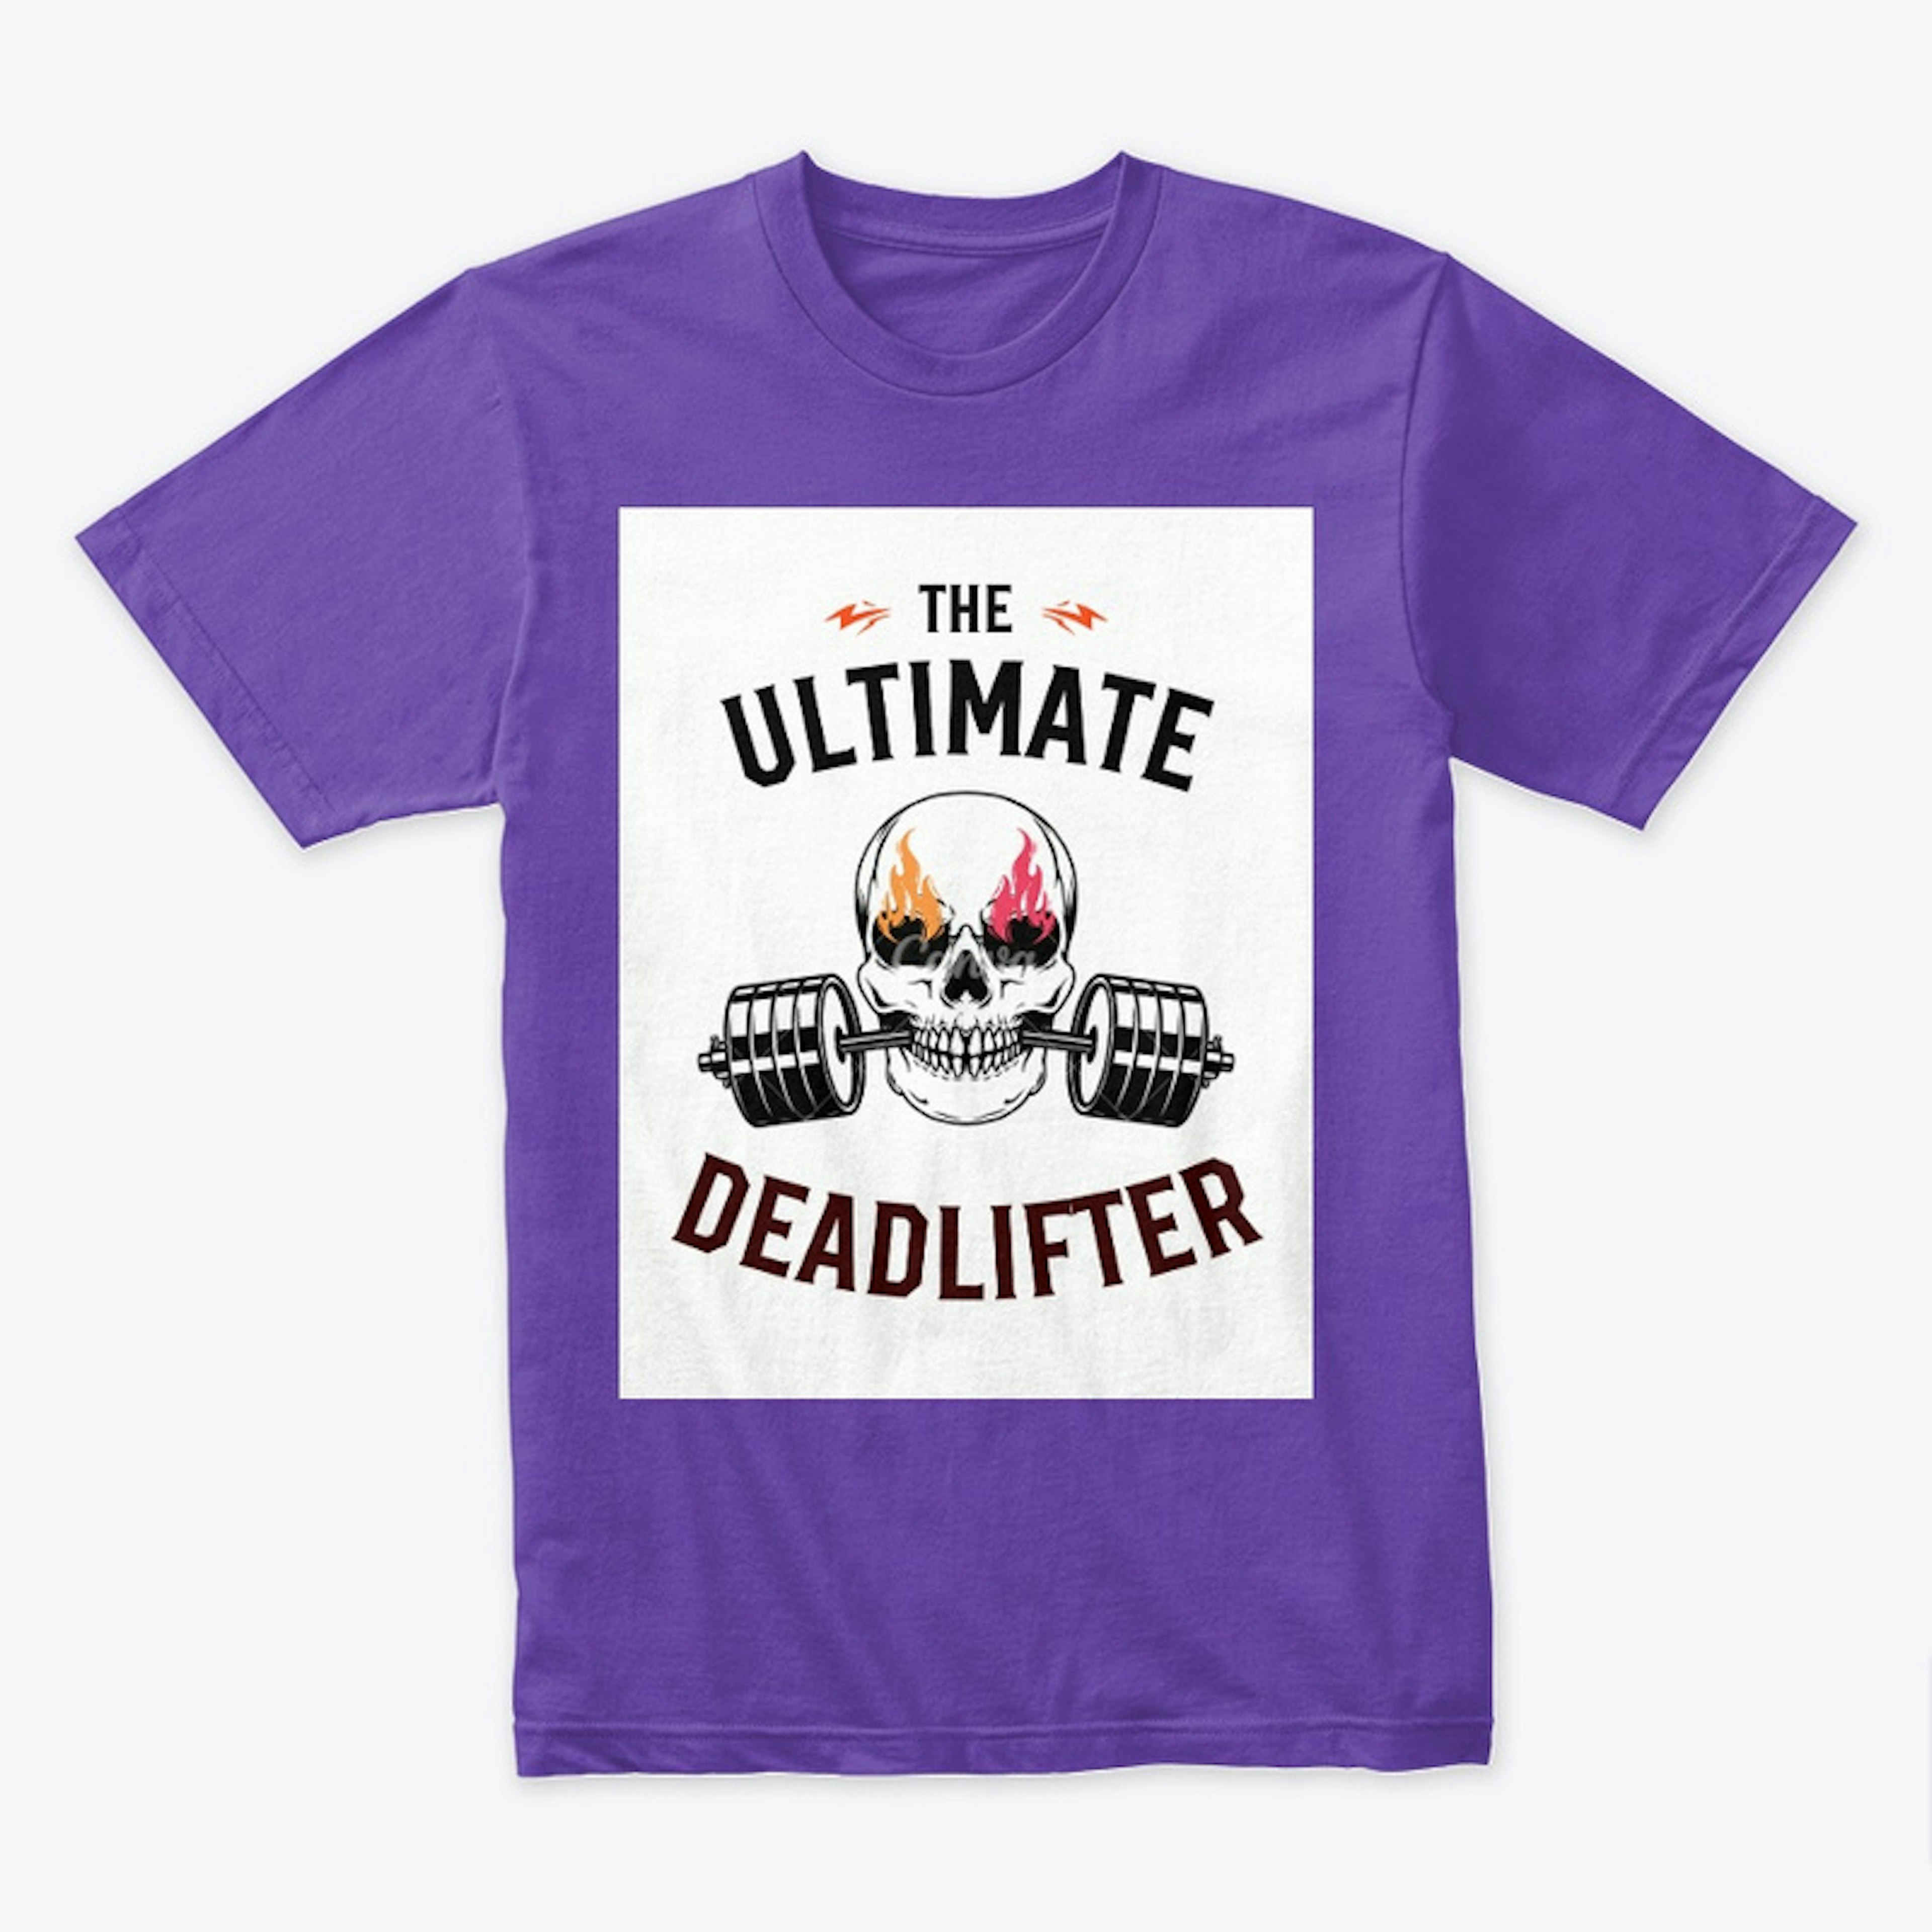 The ultimate deadlifter